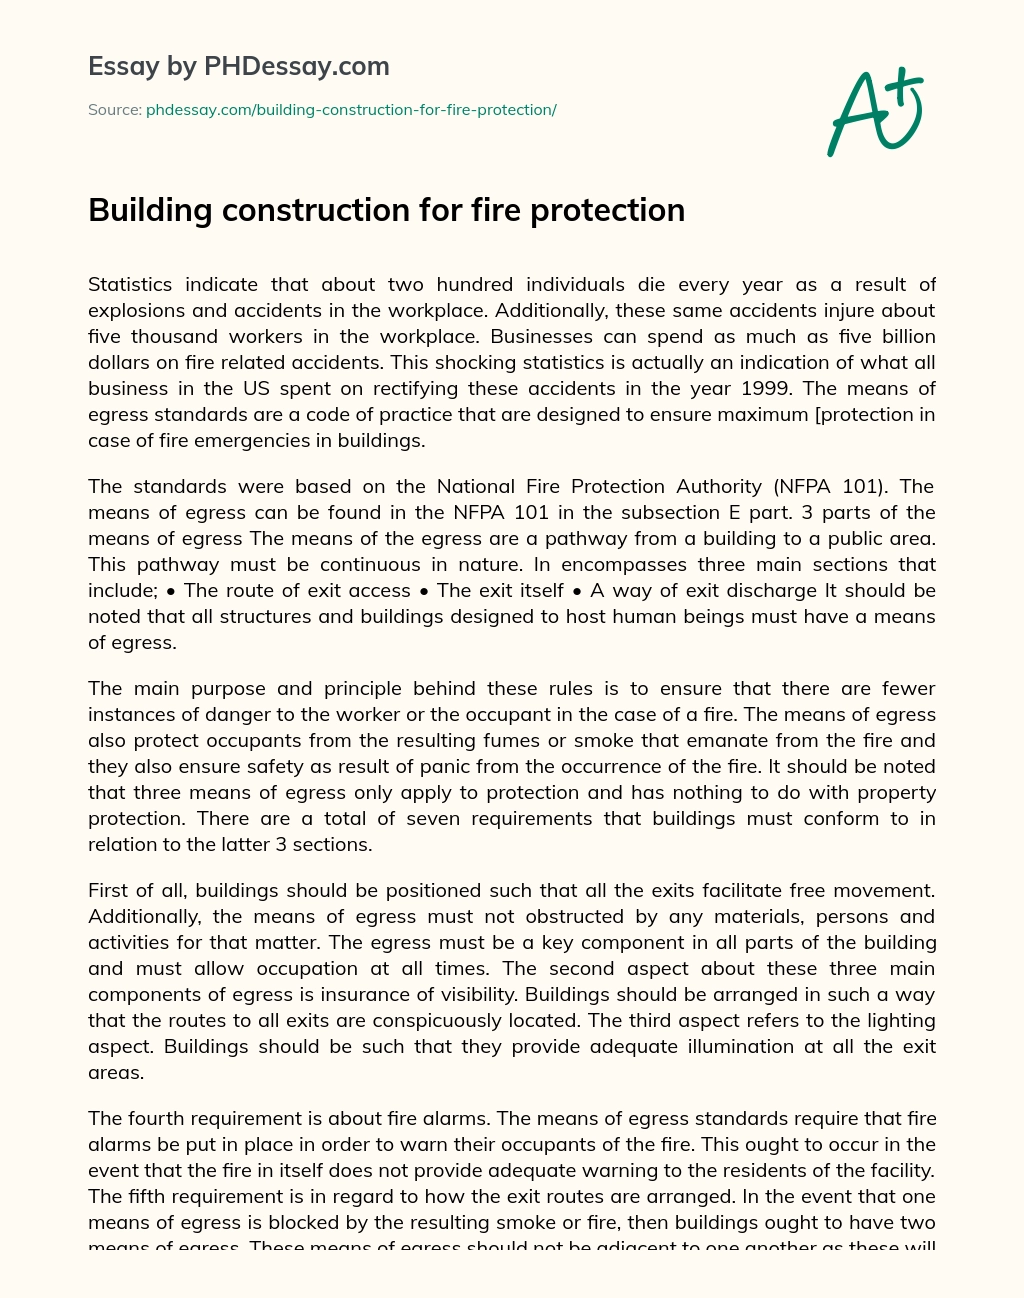 Building construction for fire protection essay